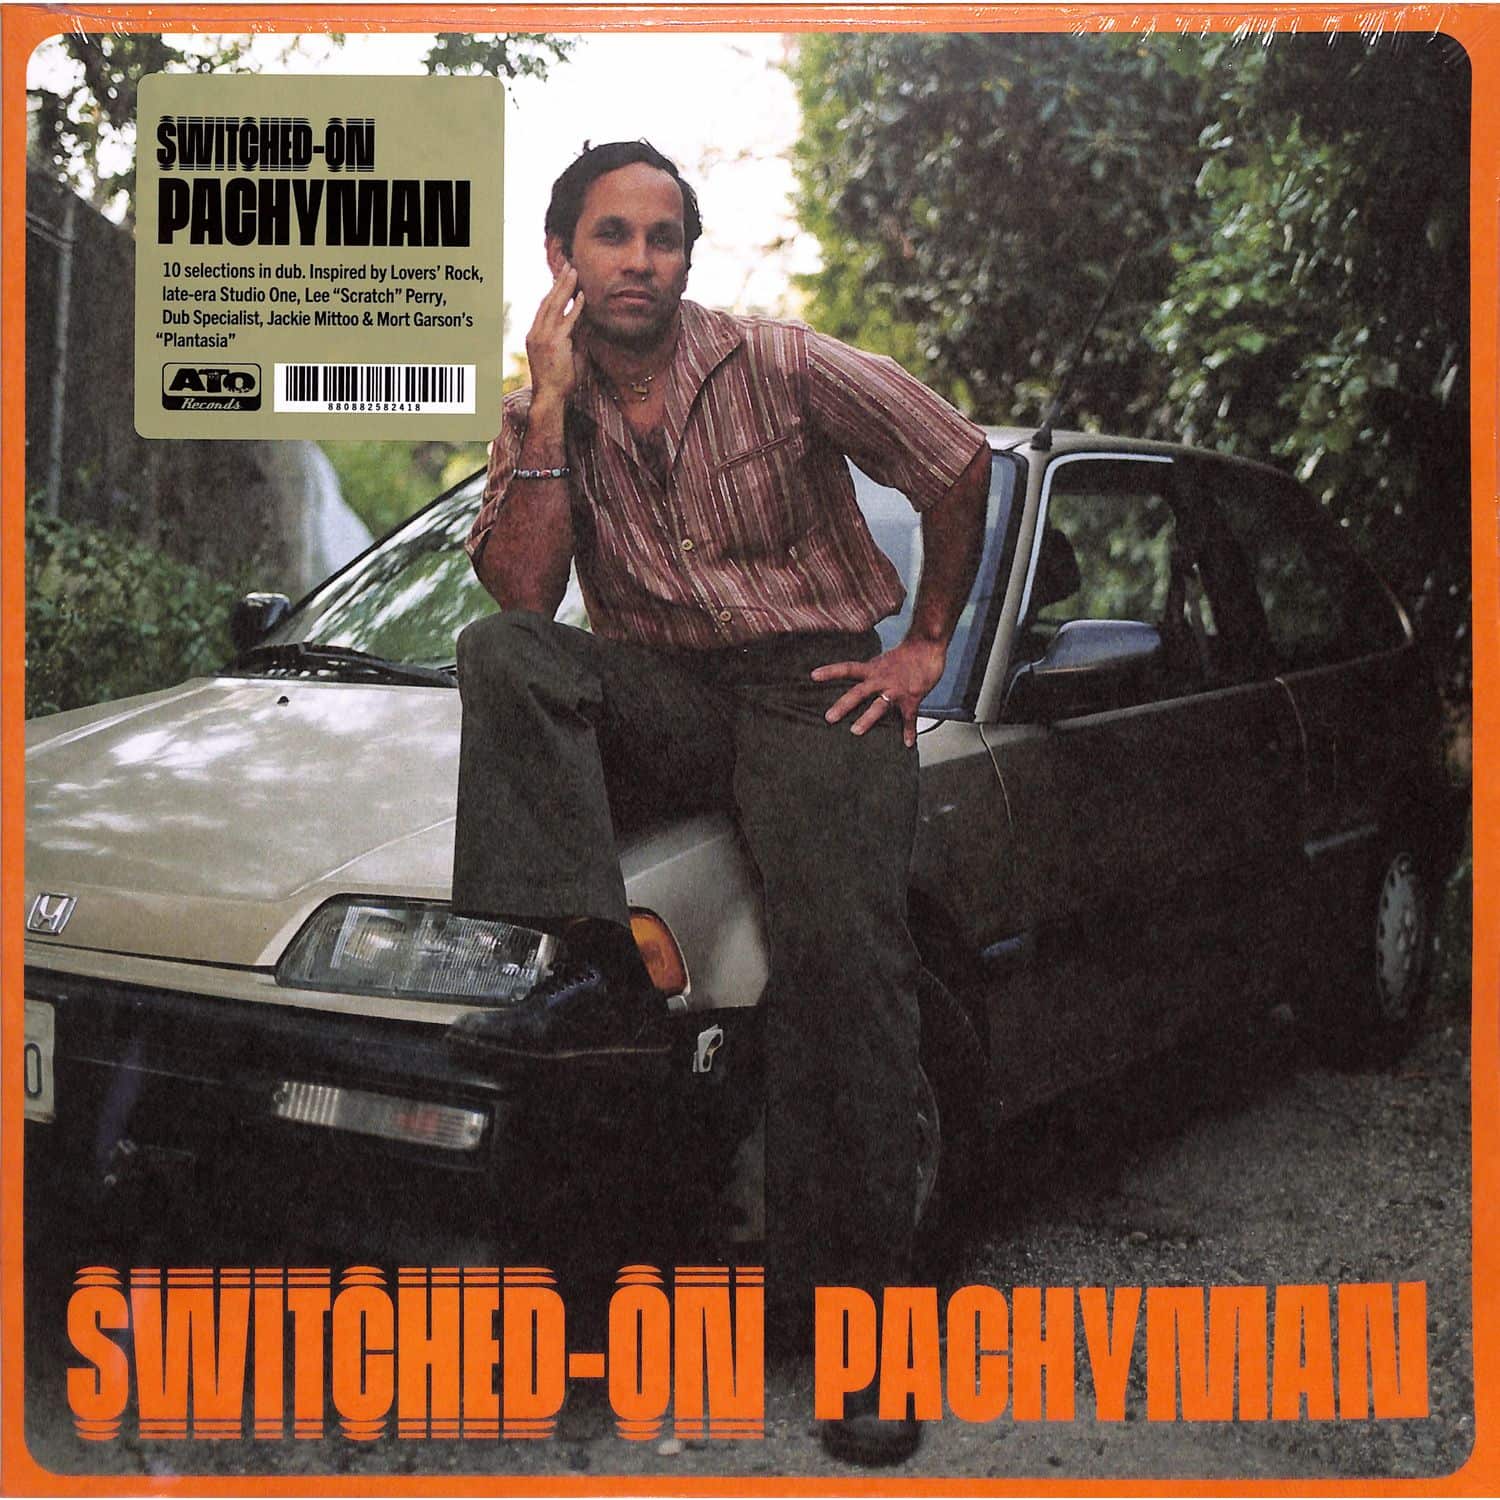 Pachyman - SWITCHED-ON 